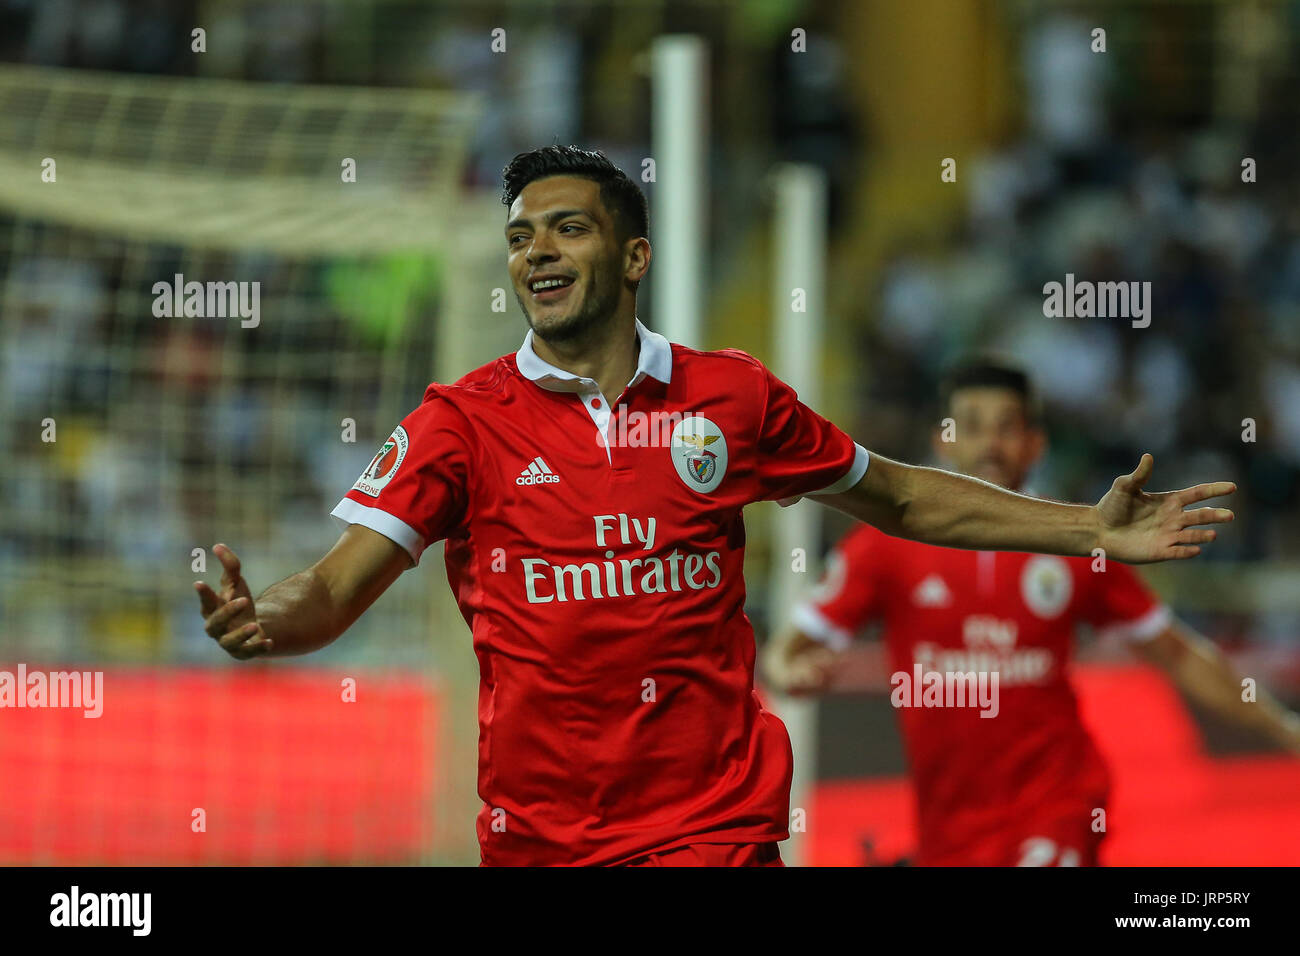 Benfica«s forward Raul Jimenez from Mexico celebrating after scoring a goal during the Candido Oliveira Super Cup match between SL Benfica and Vitoria Guimaraes at Municipal de Aveiro Stadium on August 5, 2017 in Aveiro, Portugal. (Photo by Bruno Barros) Stock Photo